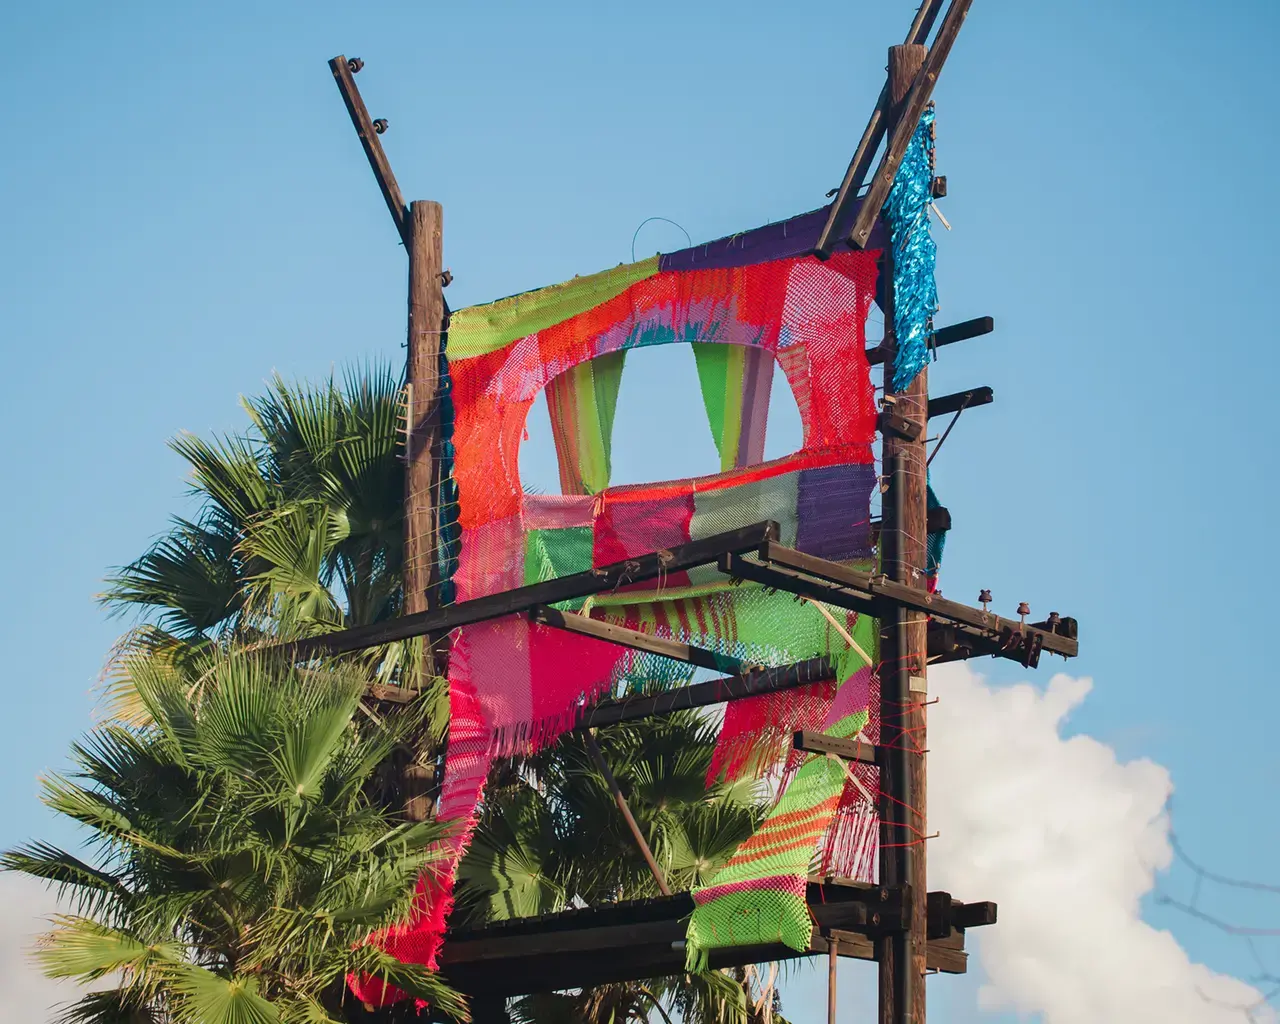 Pew Fellow Jesse Harrod, Hatch, 2019; paracord, metal, wood, found structure; 40’ x 20’ x 10’; site-specific installation; the Bowtie, Los Angeles, CA. Photo by Gina Clyne, courtesy of Clockshop.